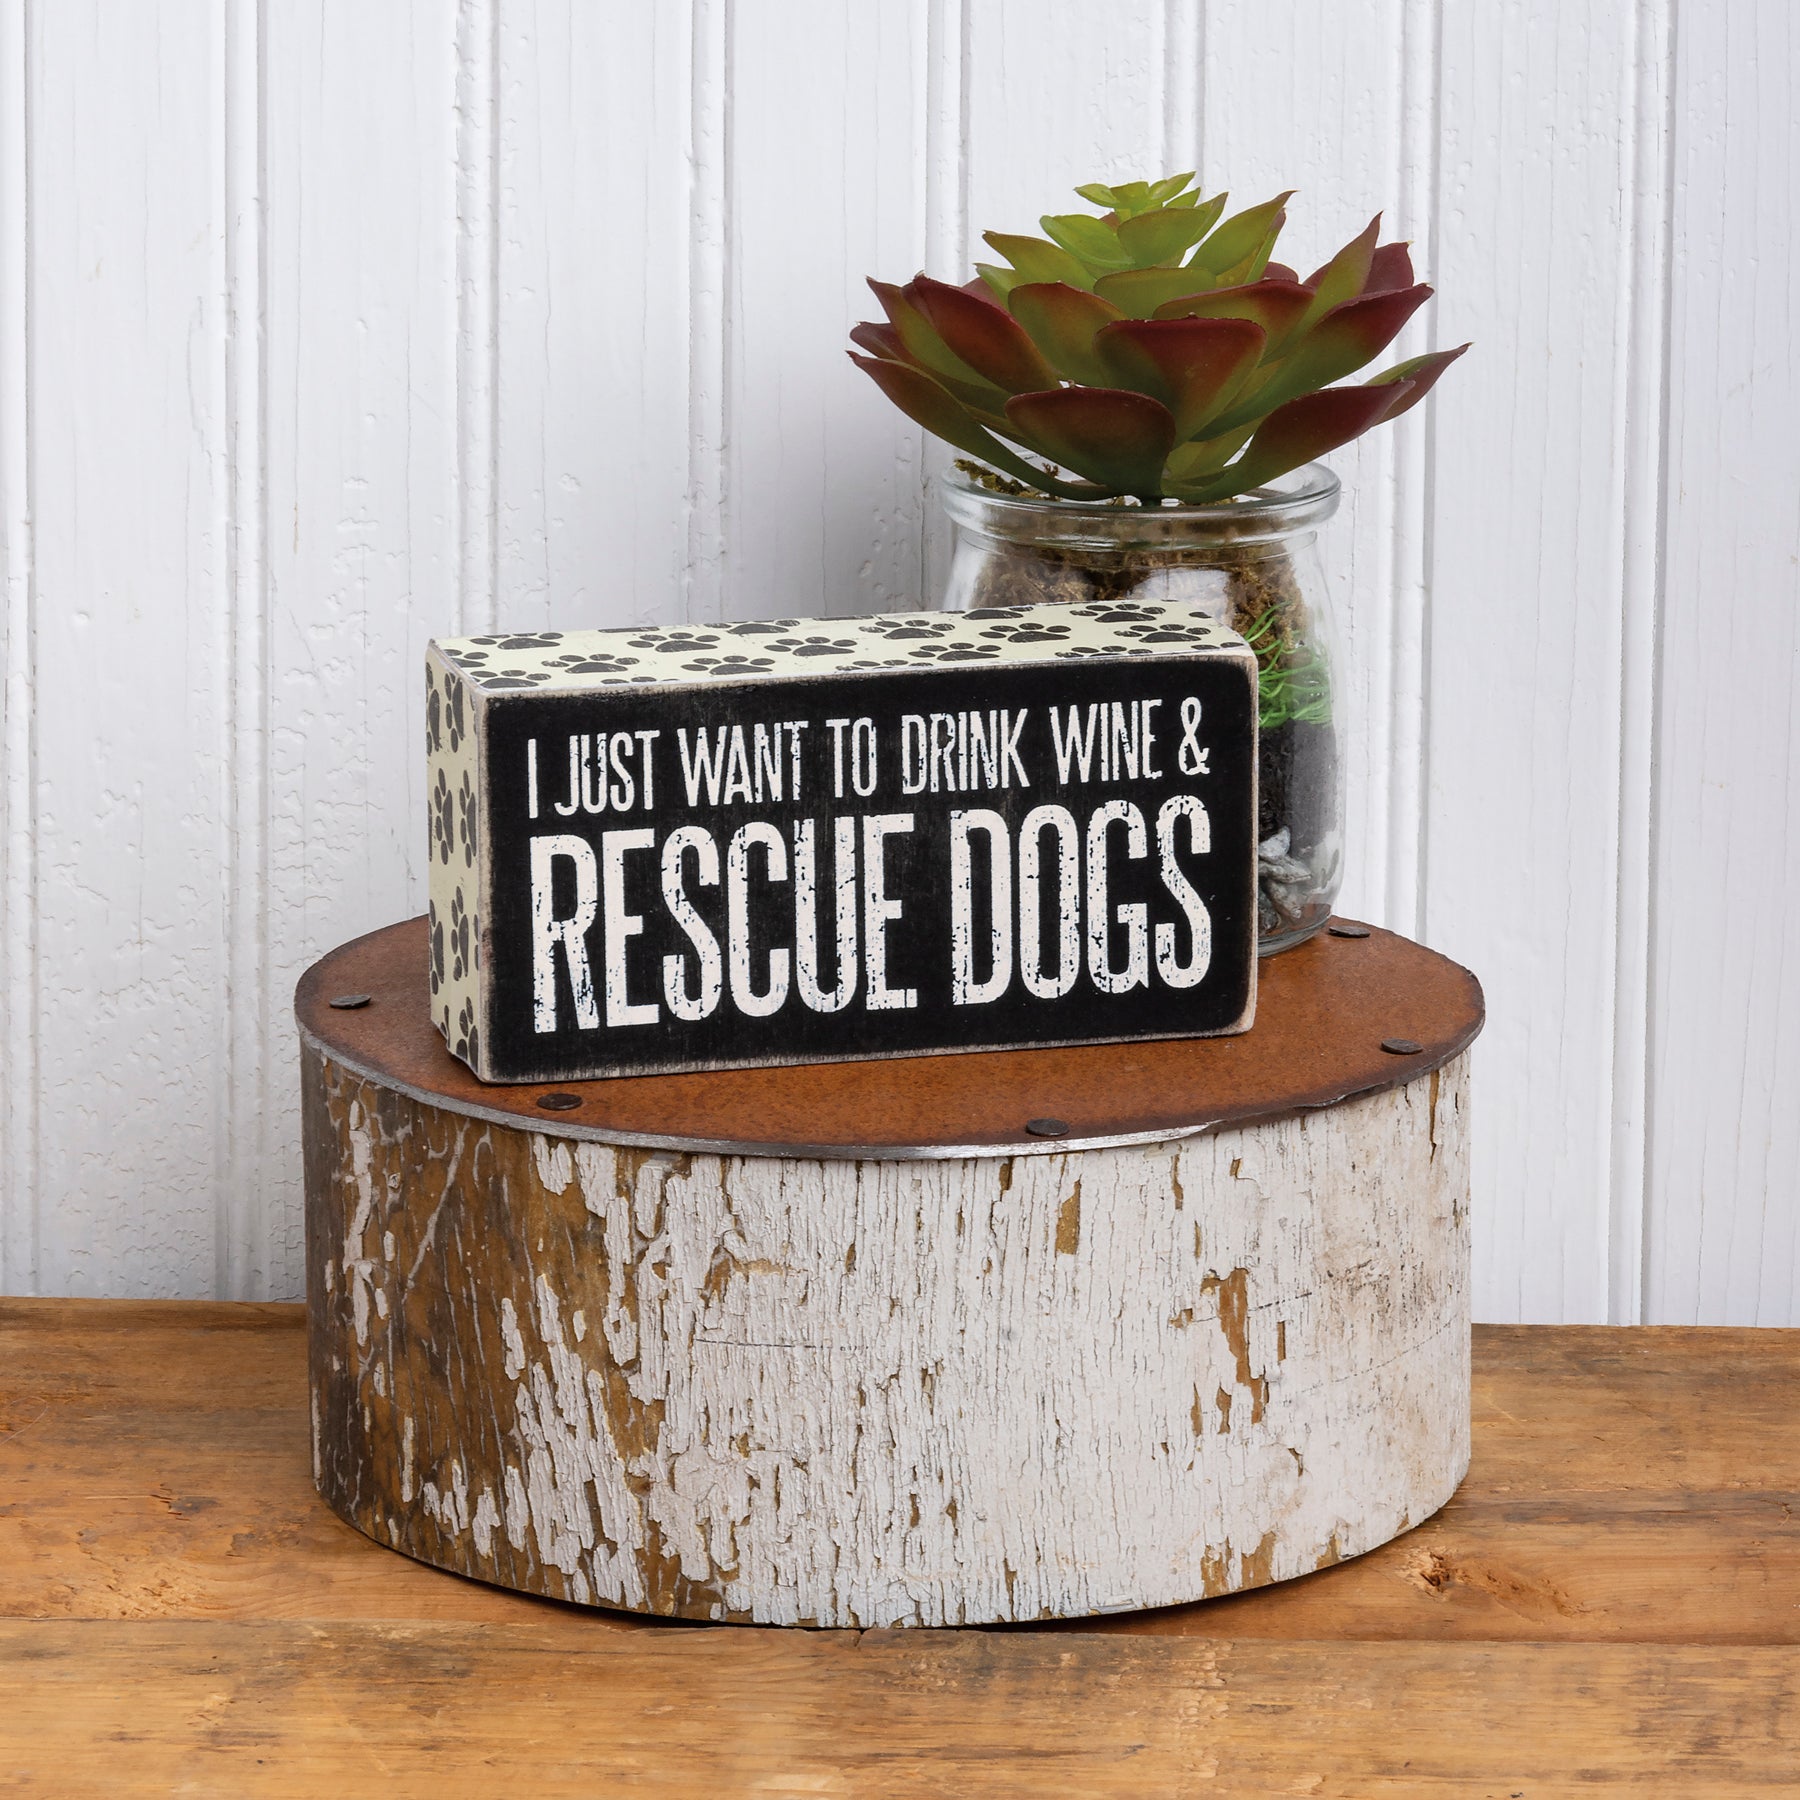 I Just Want To Drink Wine & Rescue Dogs Wooden Box Sign